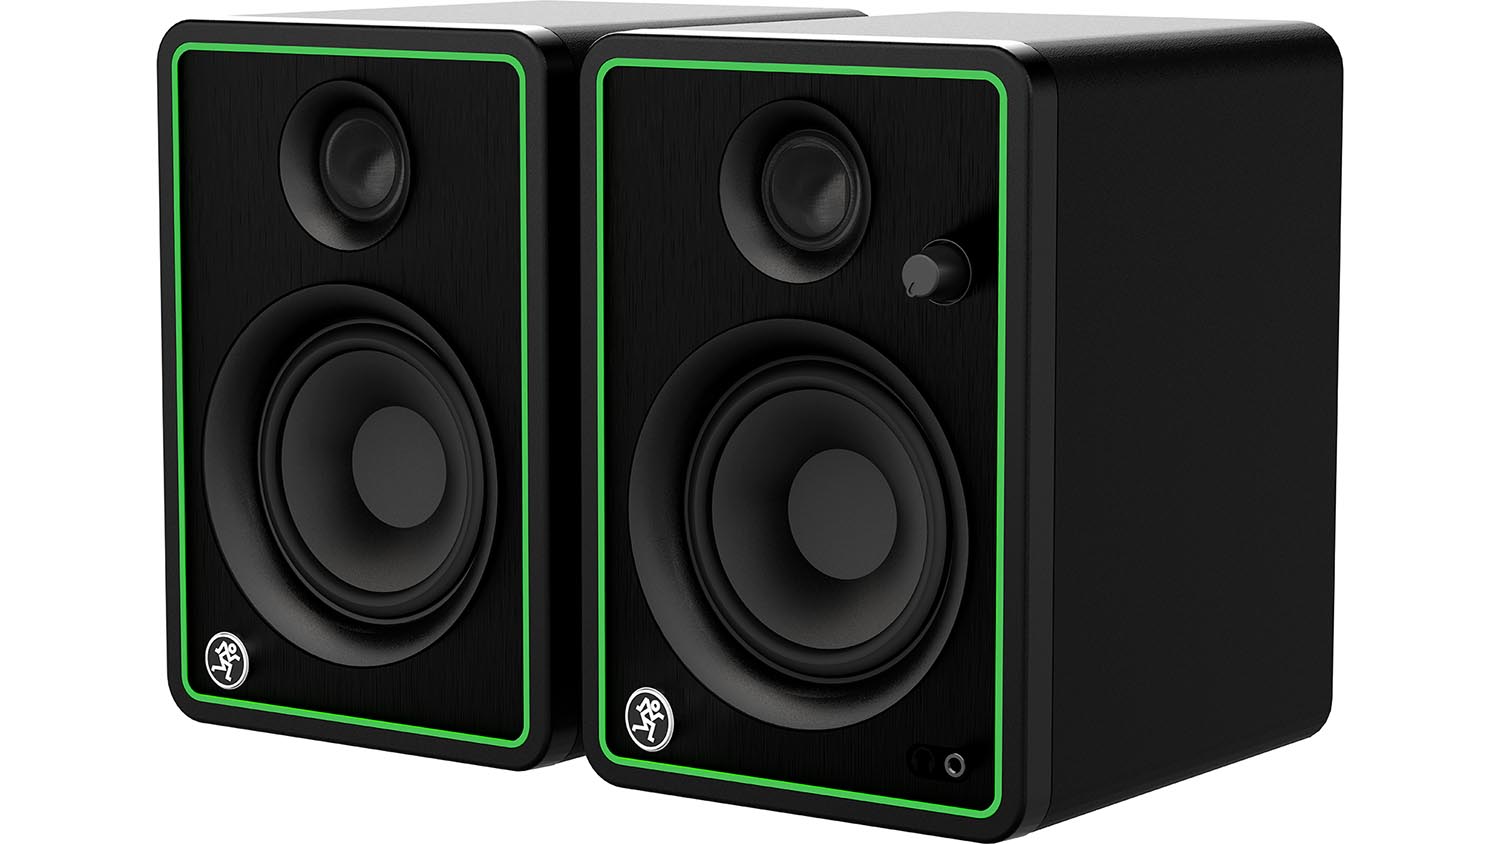 Mackie CR4-XBT, 4 Inches Creative Reference Multimedia Monitors With Bluetooth - Pair - Hollywood DJ